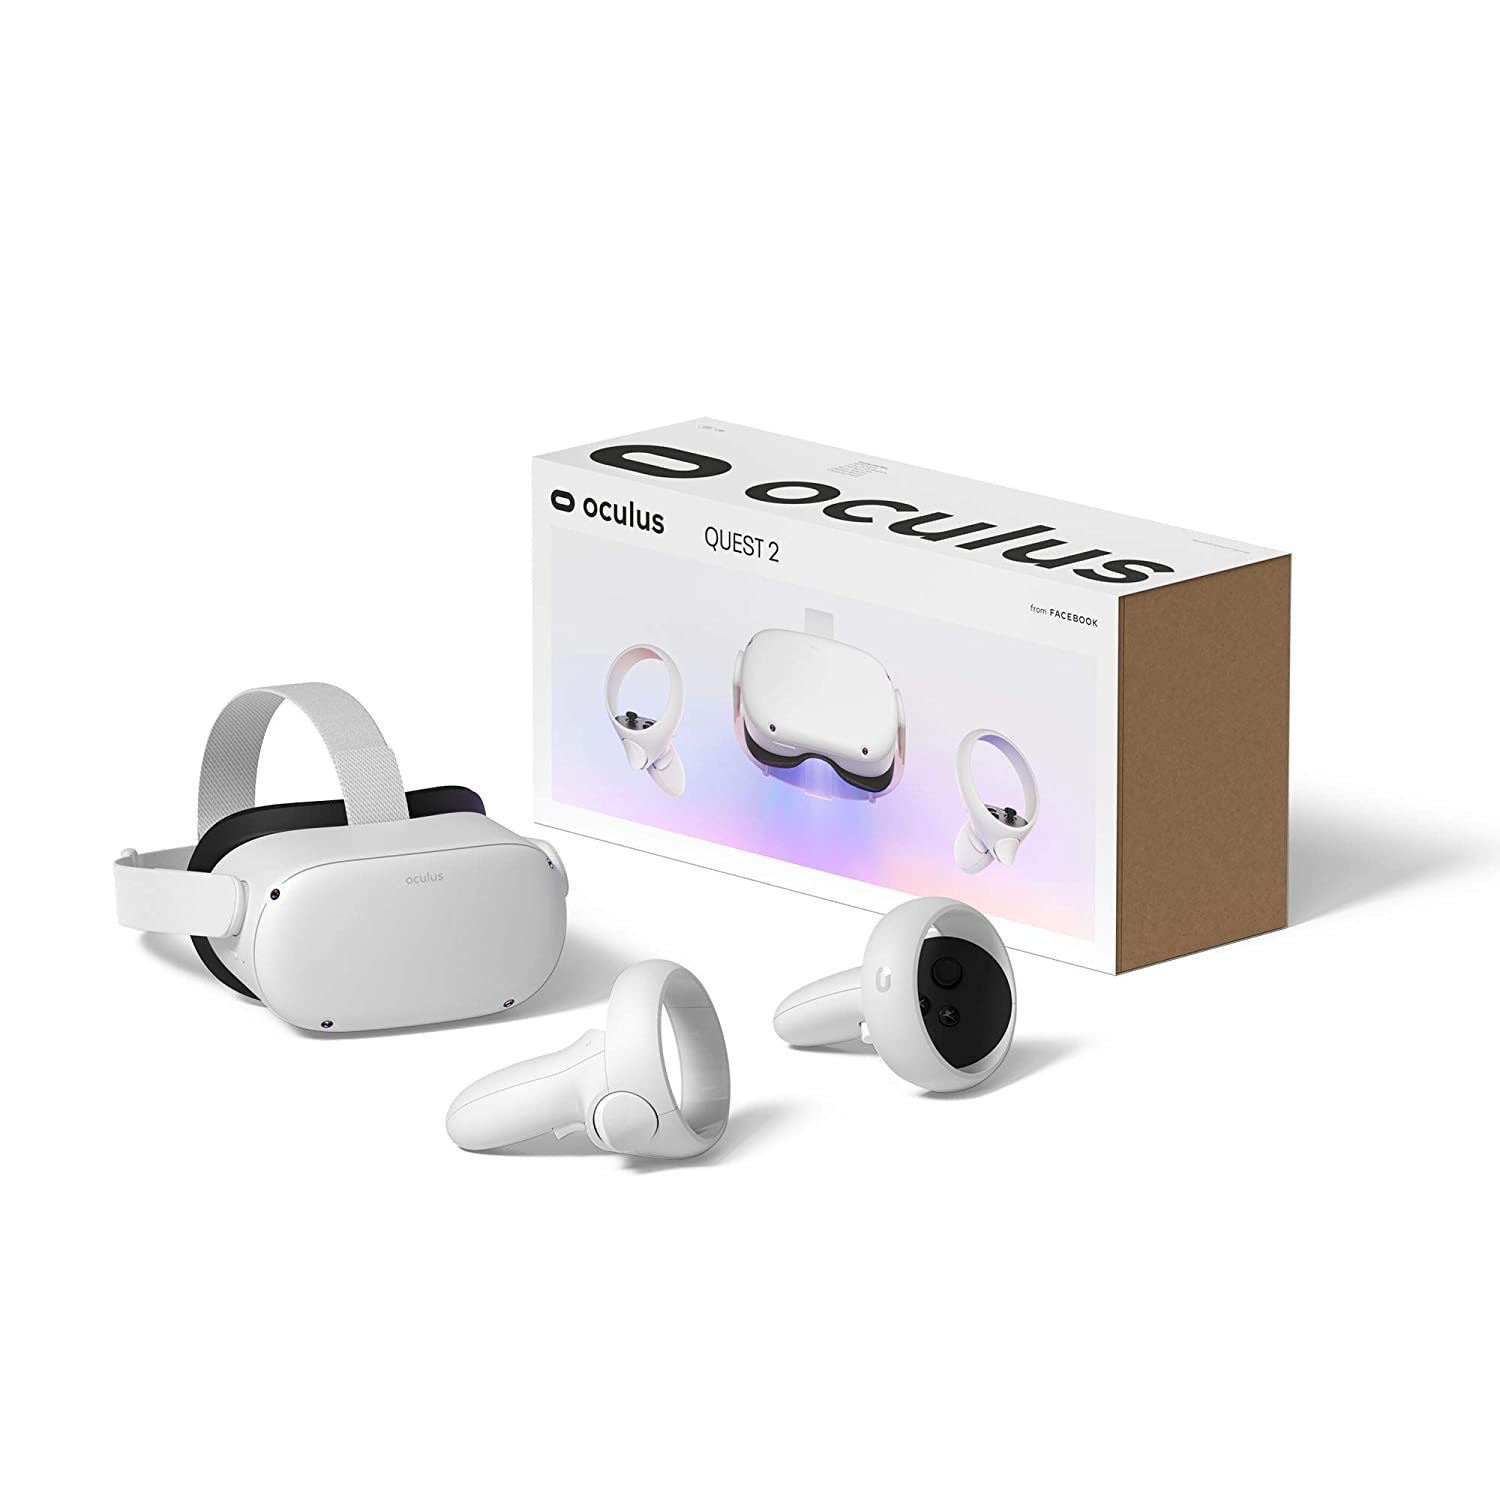 Oculus Quest 2 headsets with controllers and packaging box